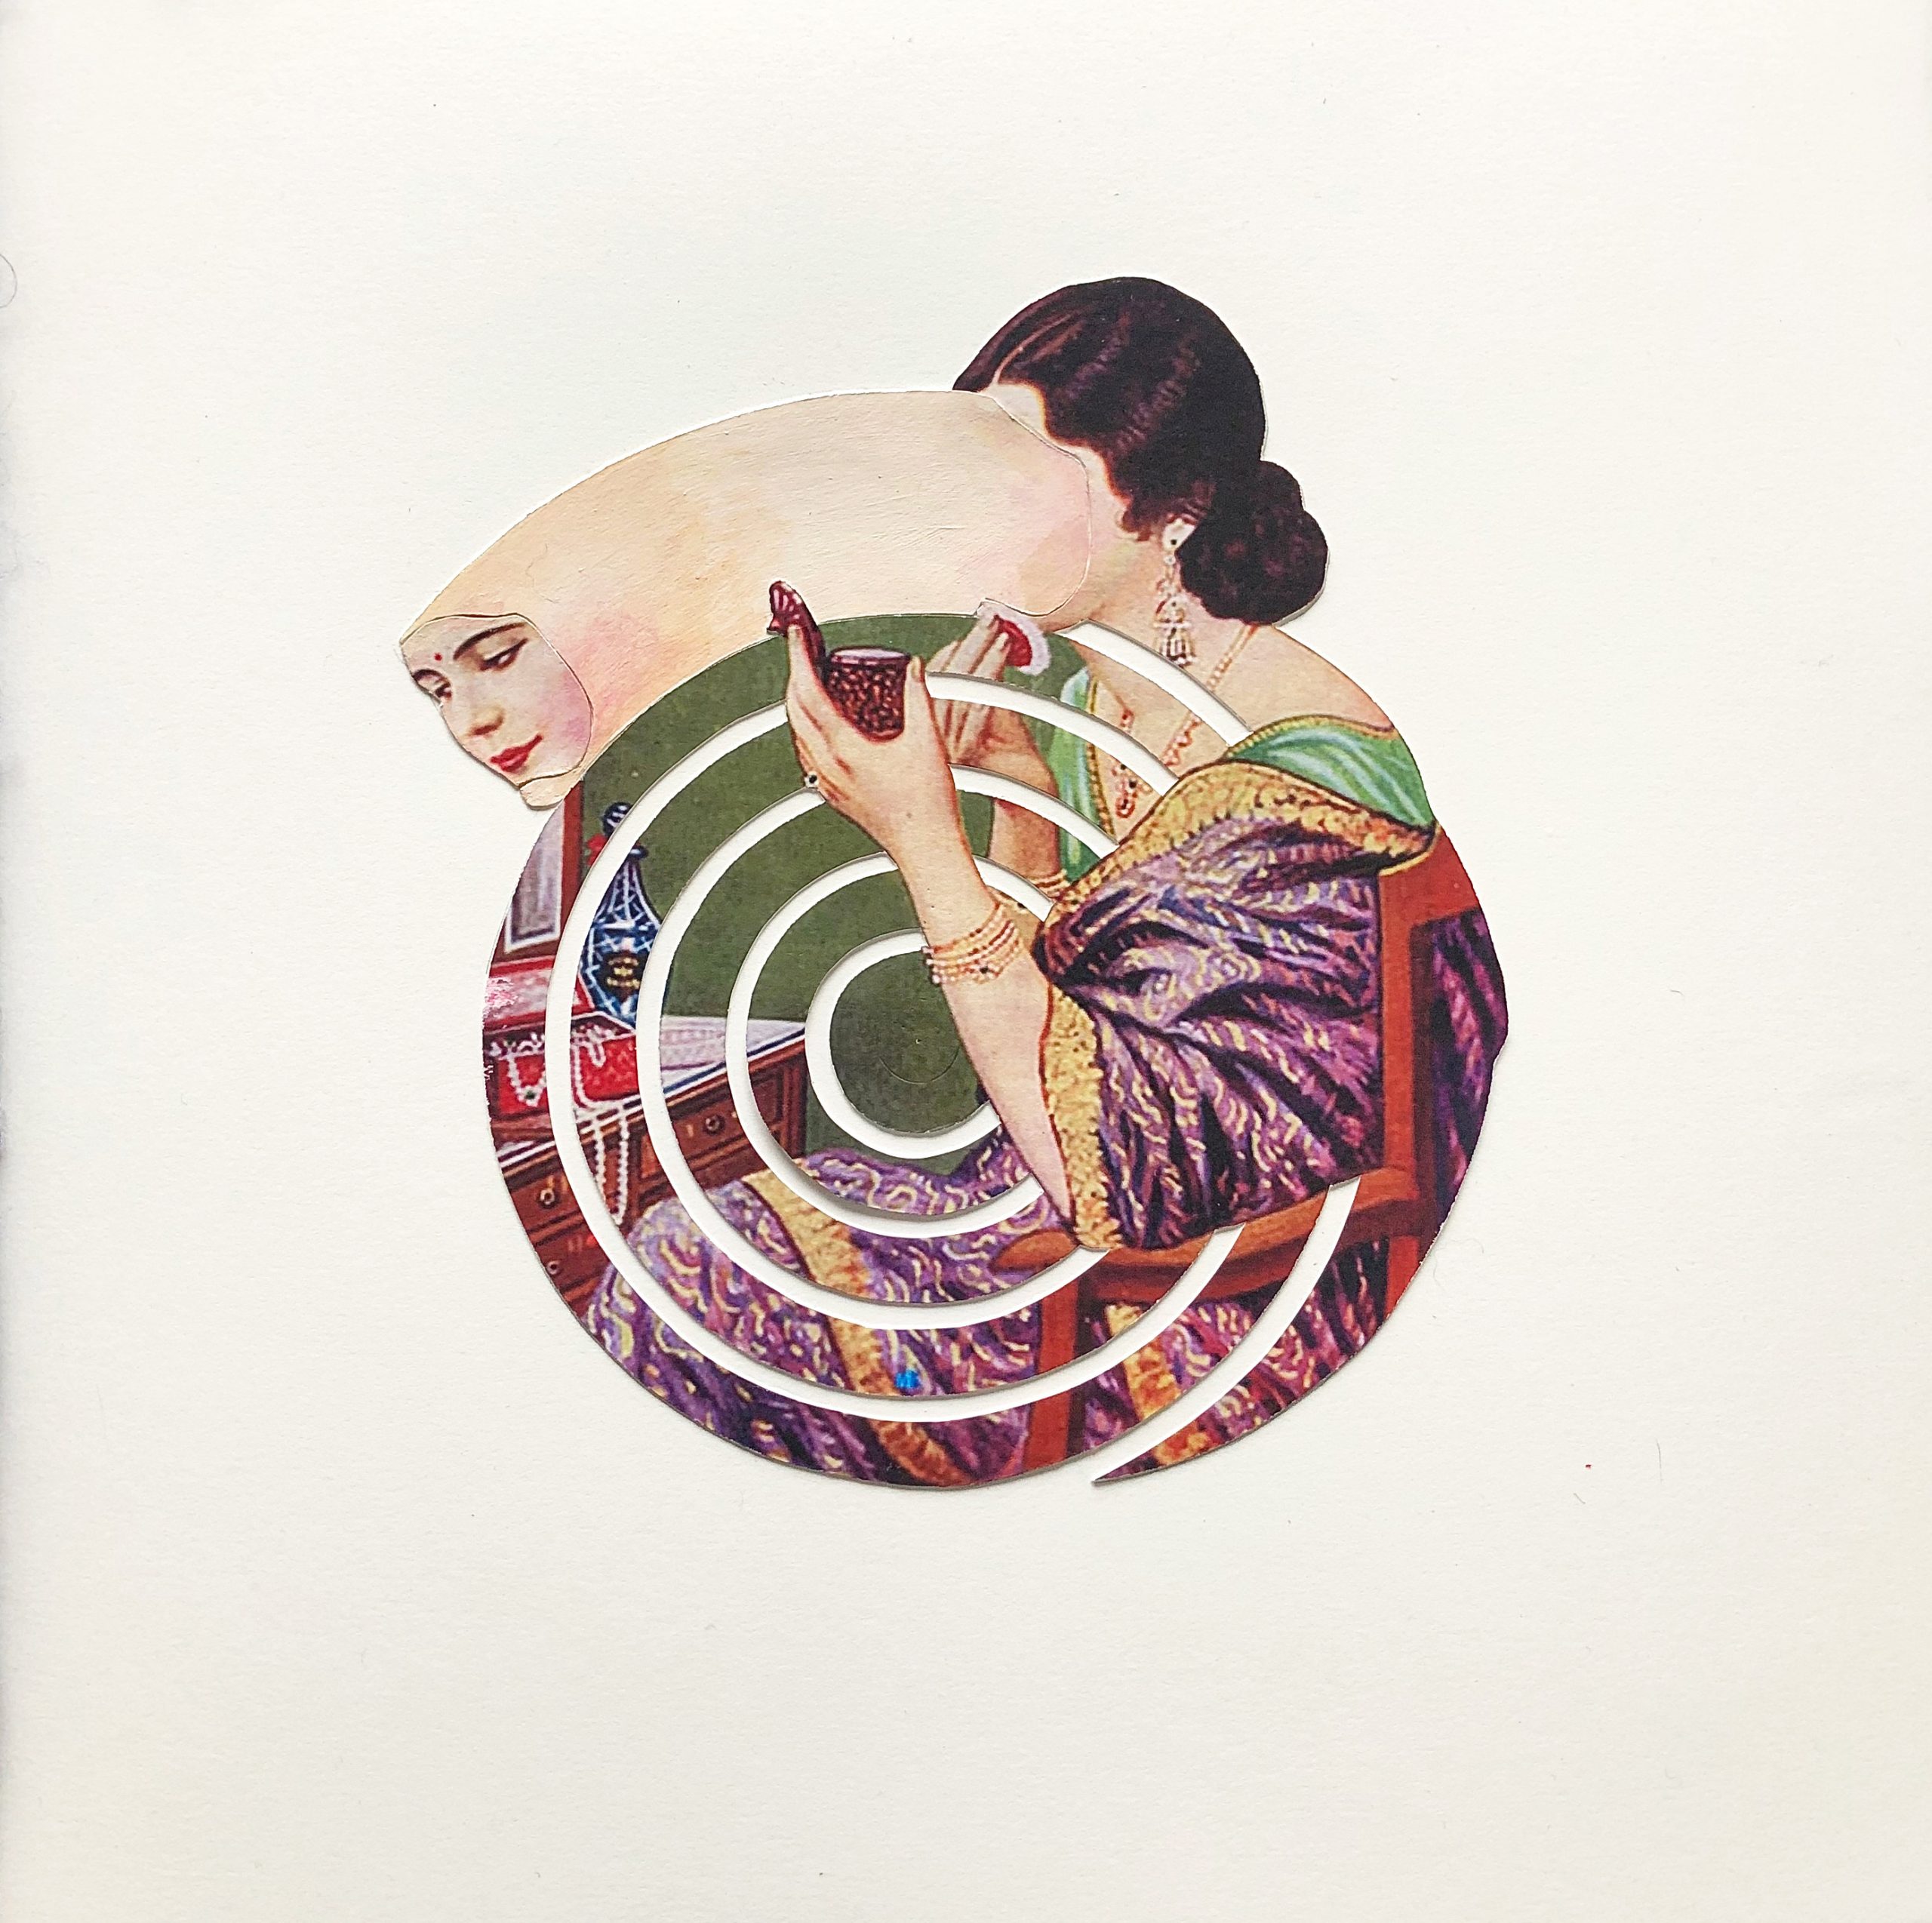 distorted illustration of an Indian woman applying makeup with a handheld mirror